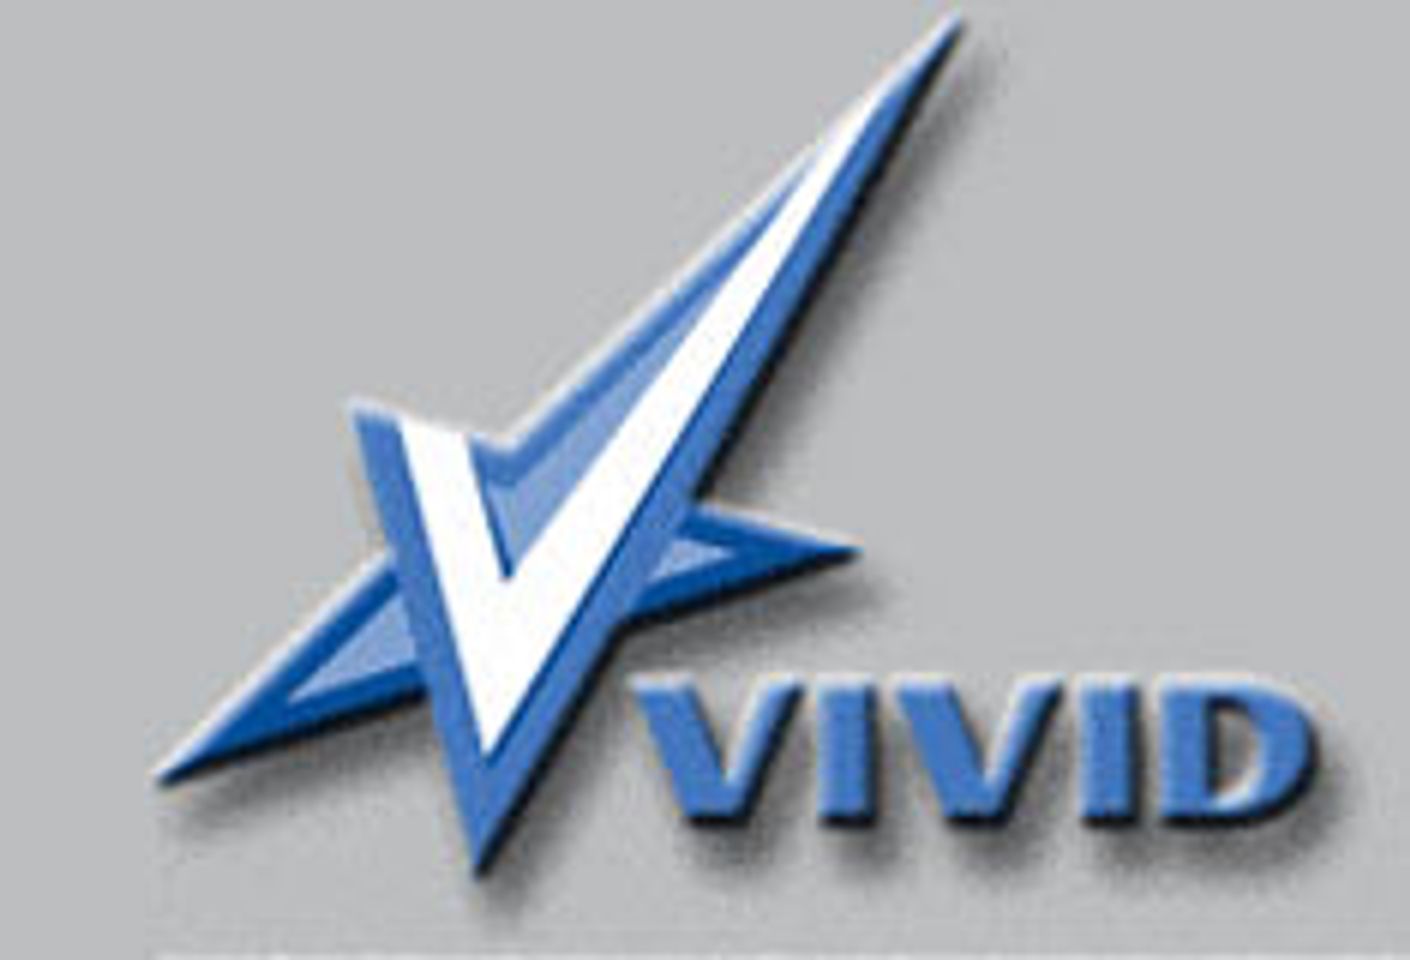 Vivid Recalls Tapes As Part of Settlement with Ripley Entertainment